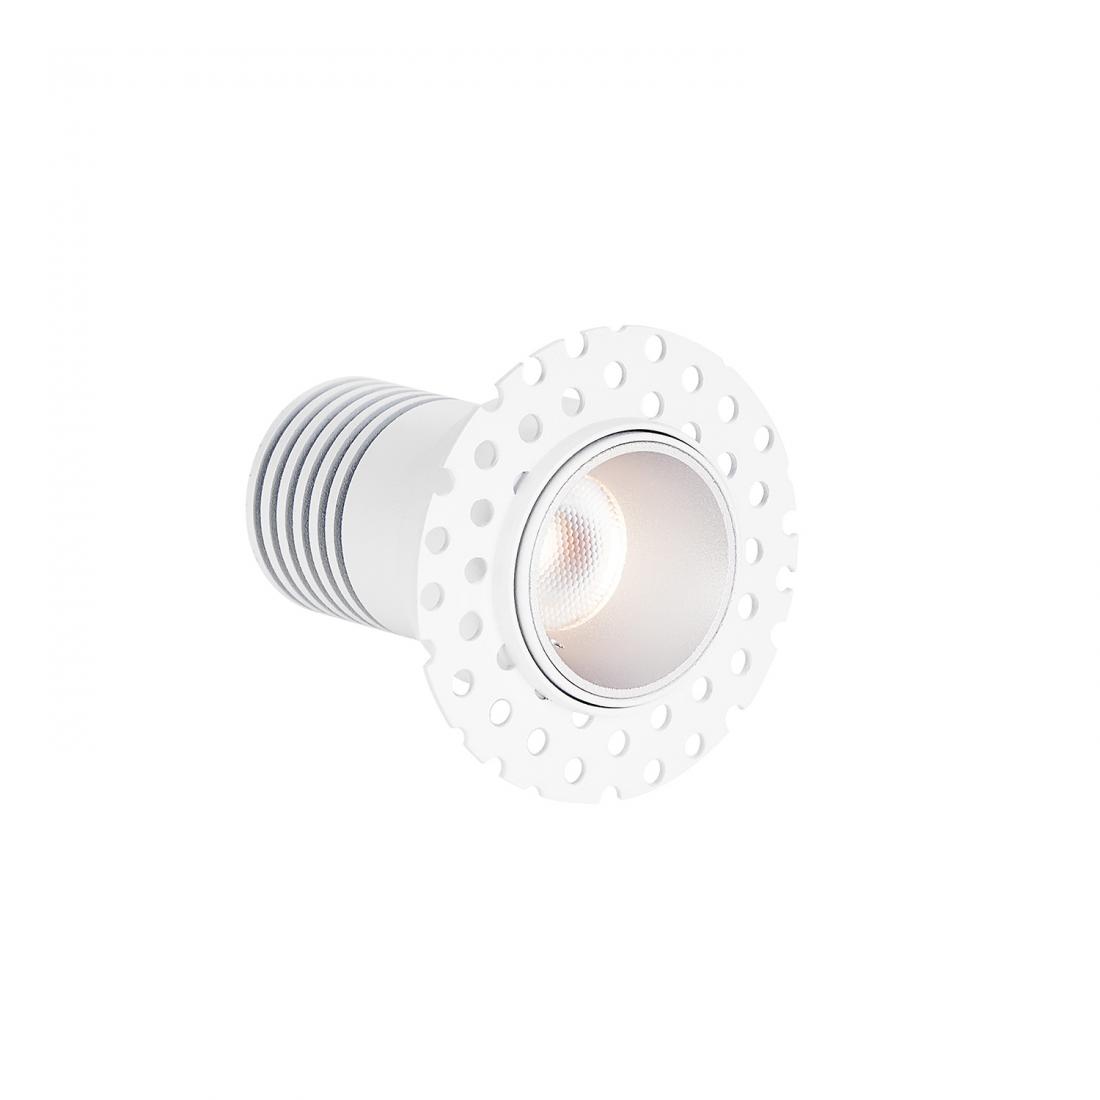 MINI Round trimless downlight for night table